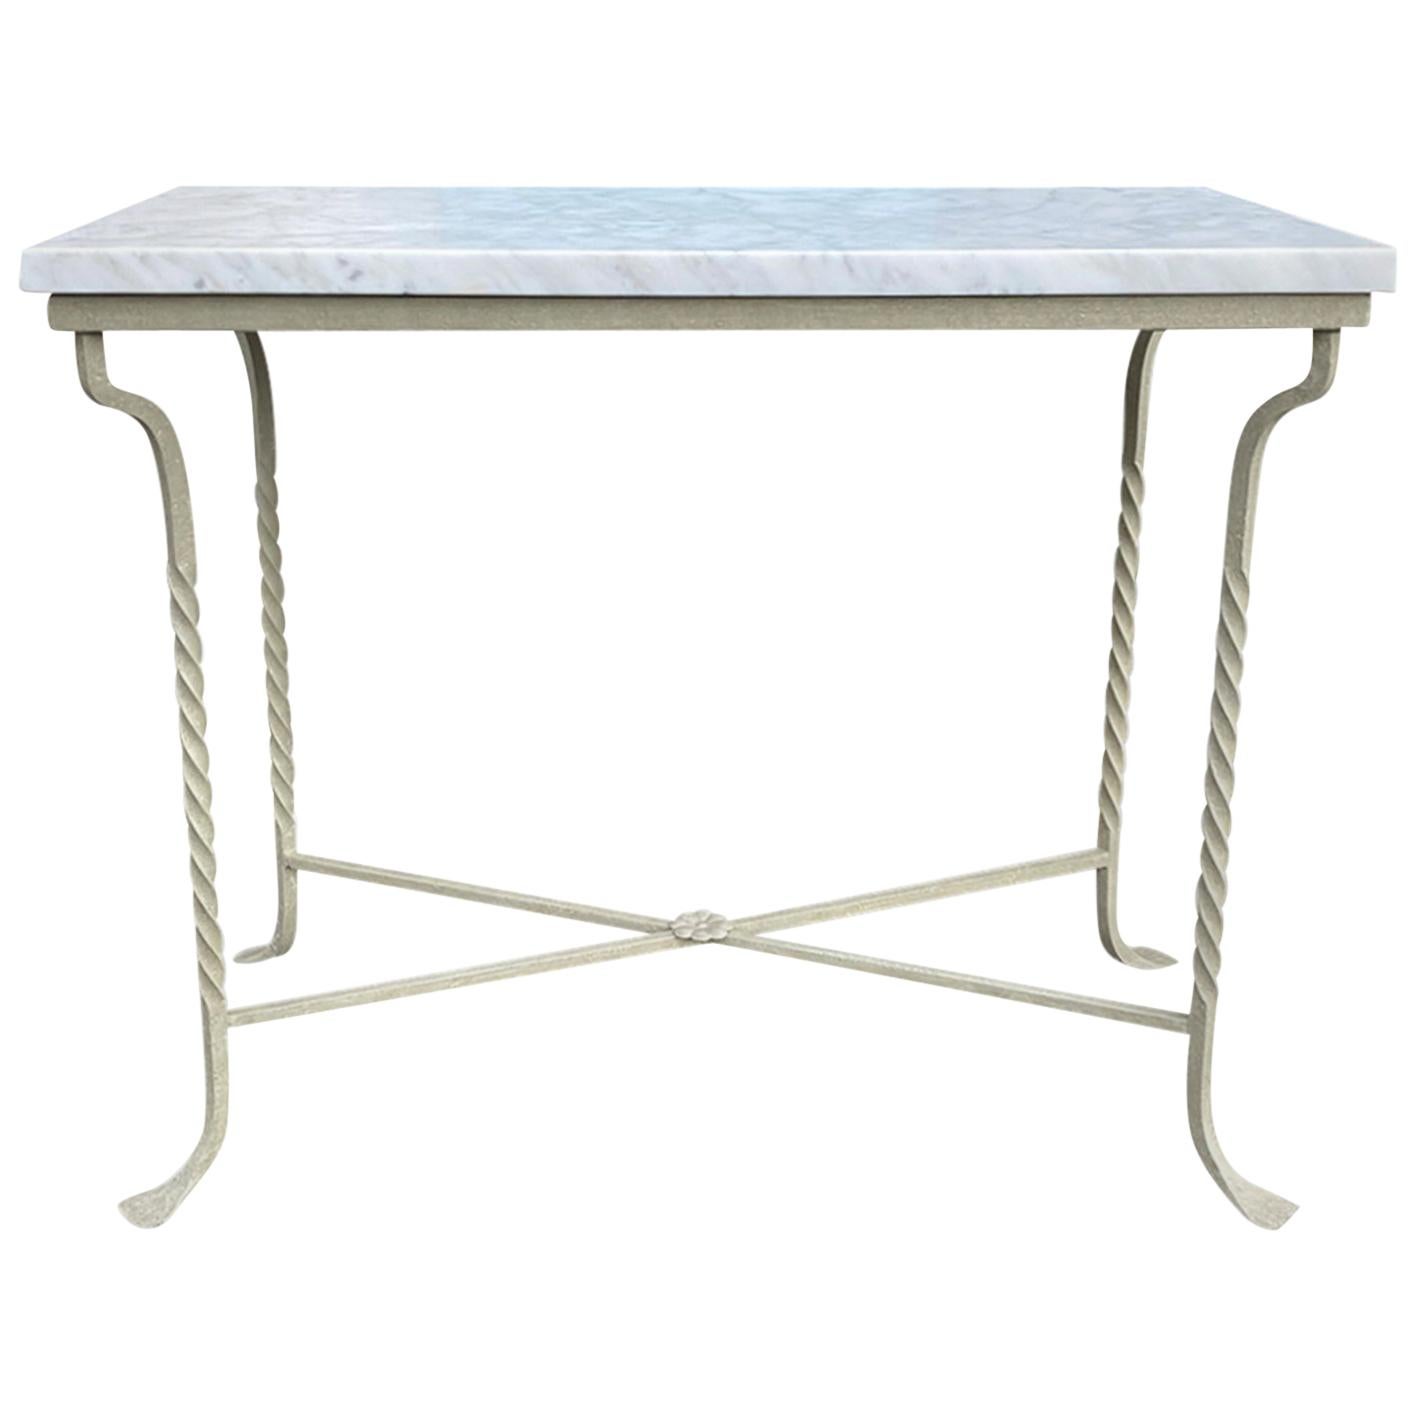 Custom Painted Iron Conservatory Table or Console, White Carrara Top circa 1930s